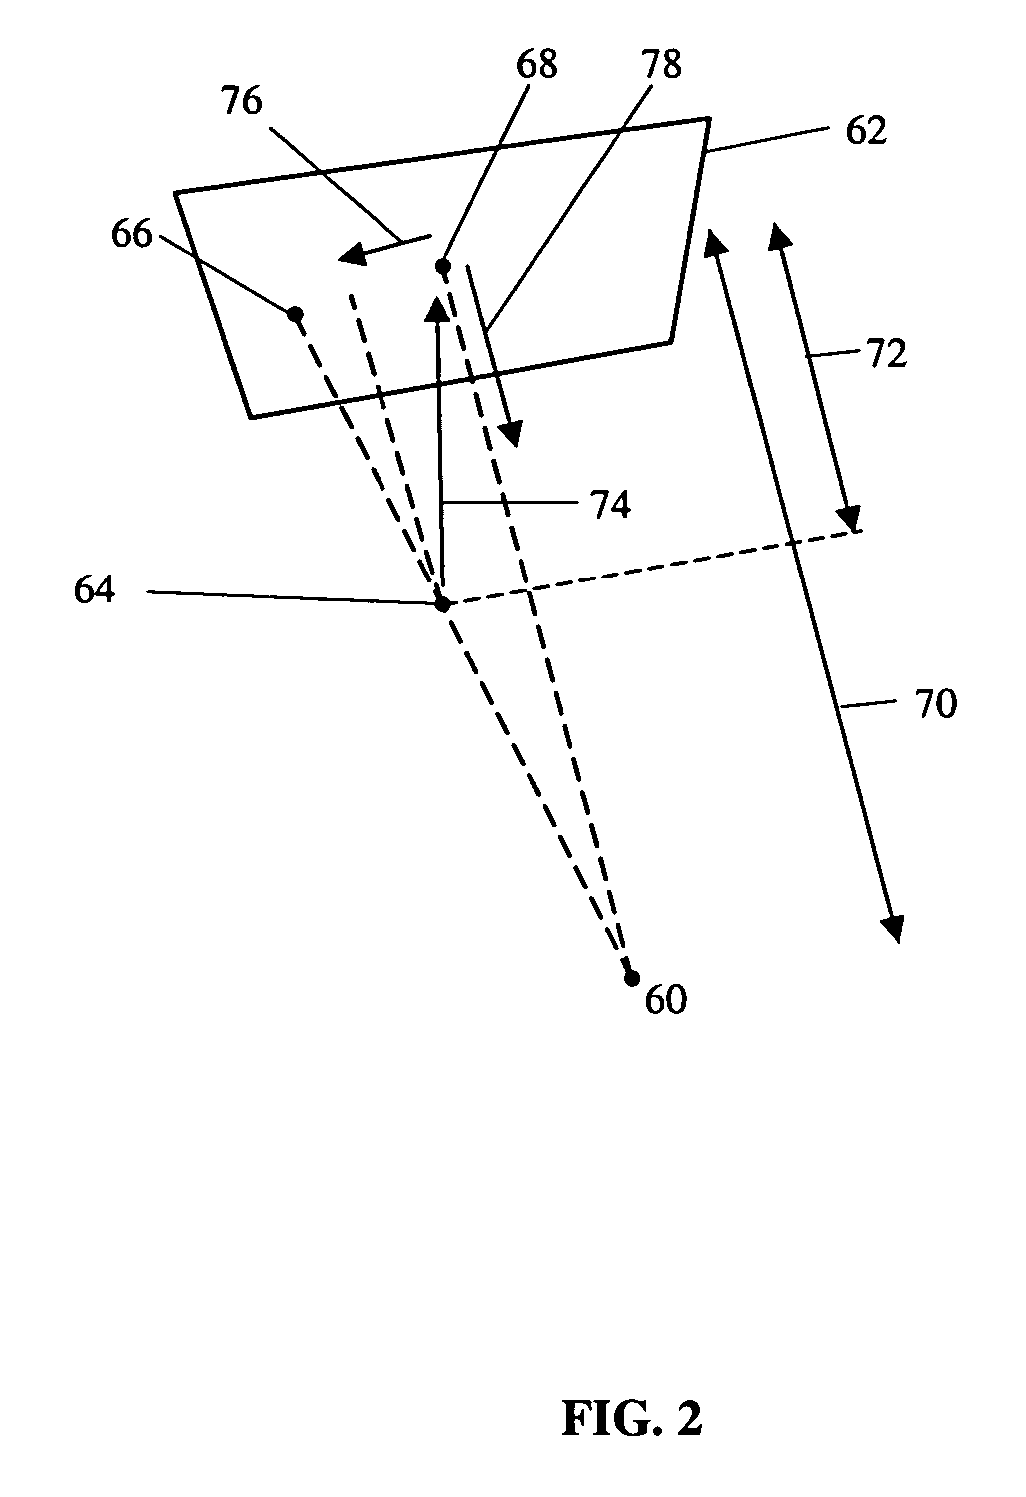 System and method of surgical imagining with anatomical overlay for navigation of surgical devices